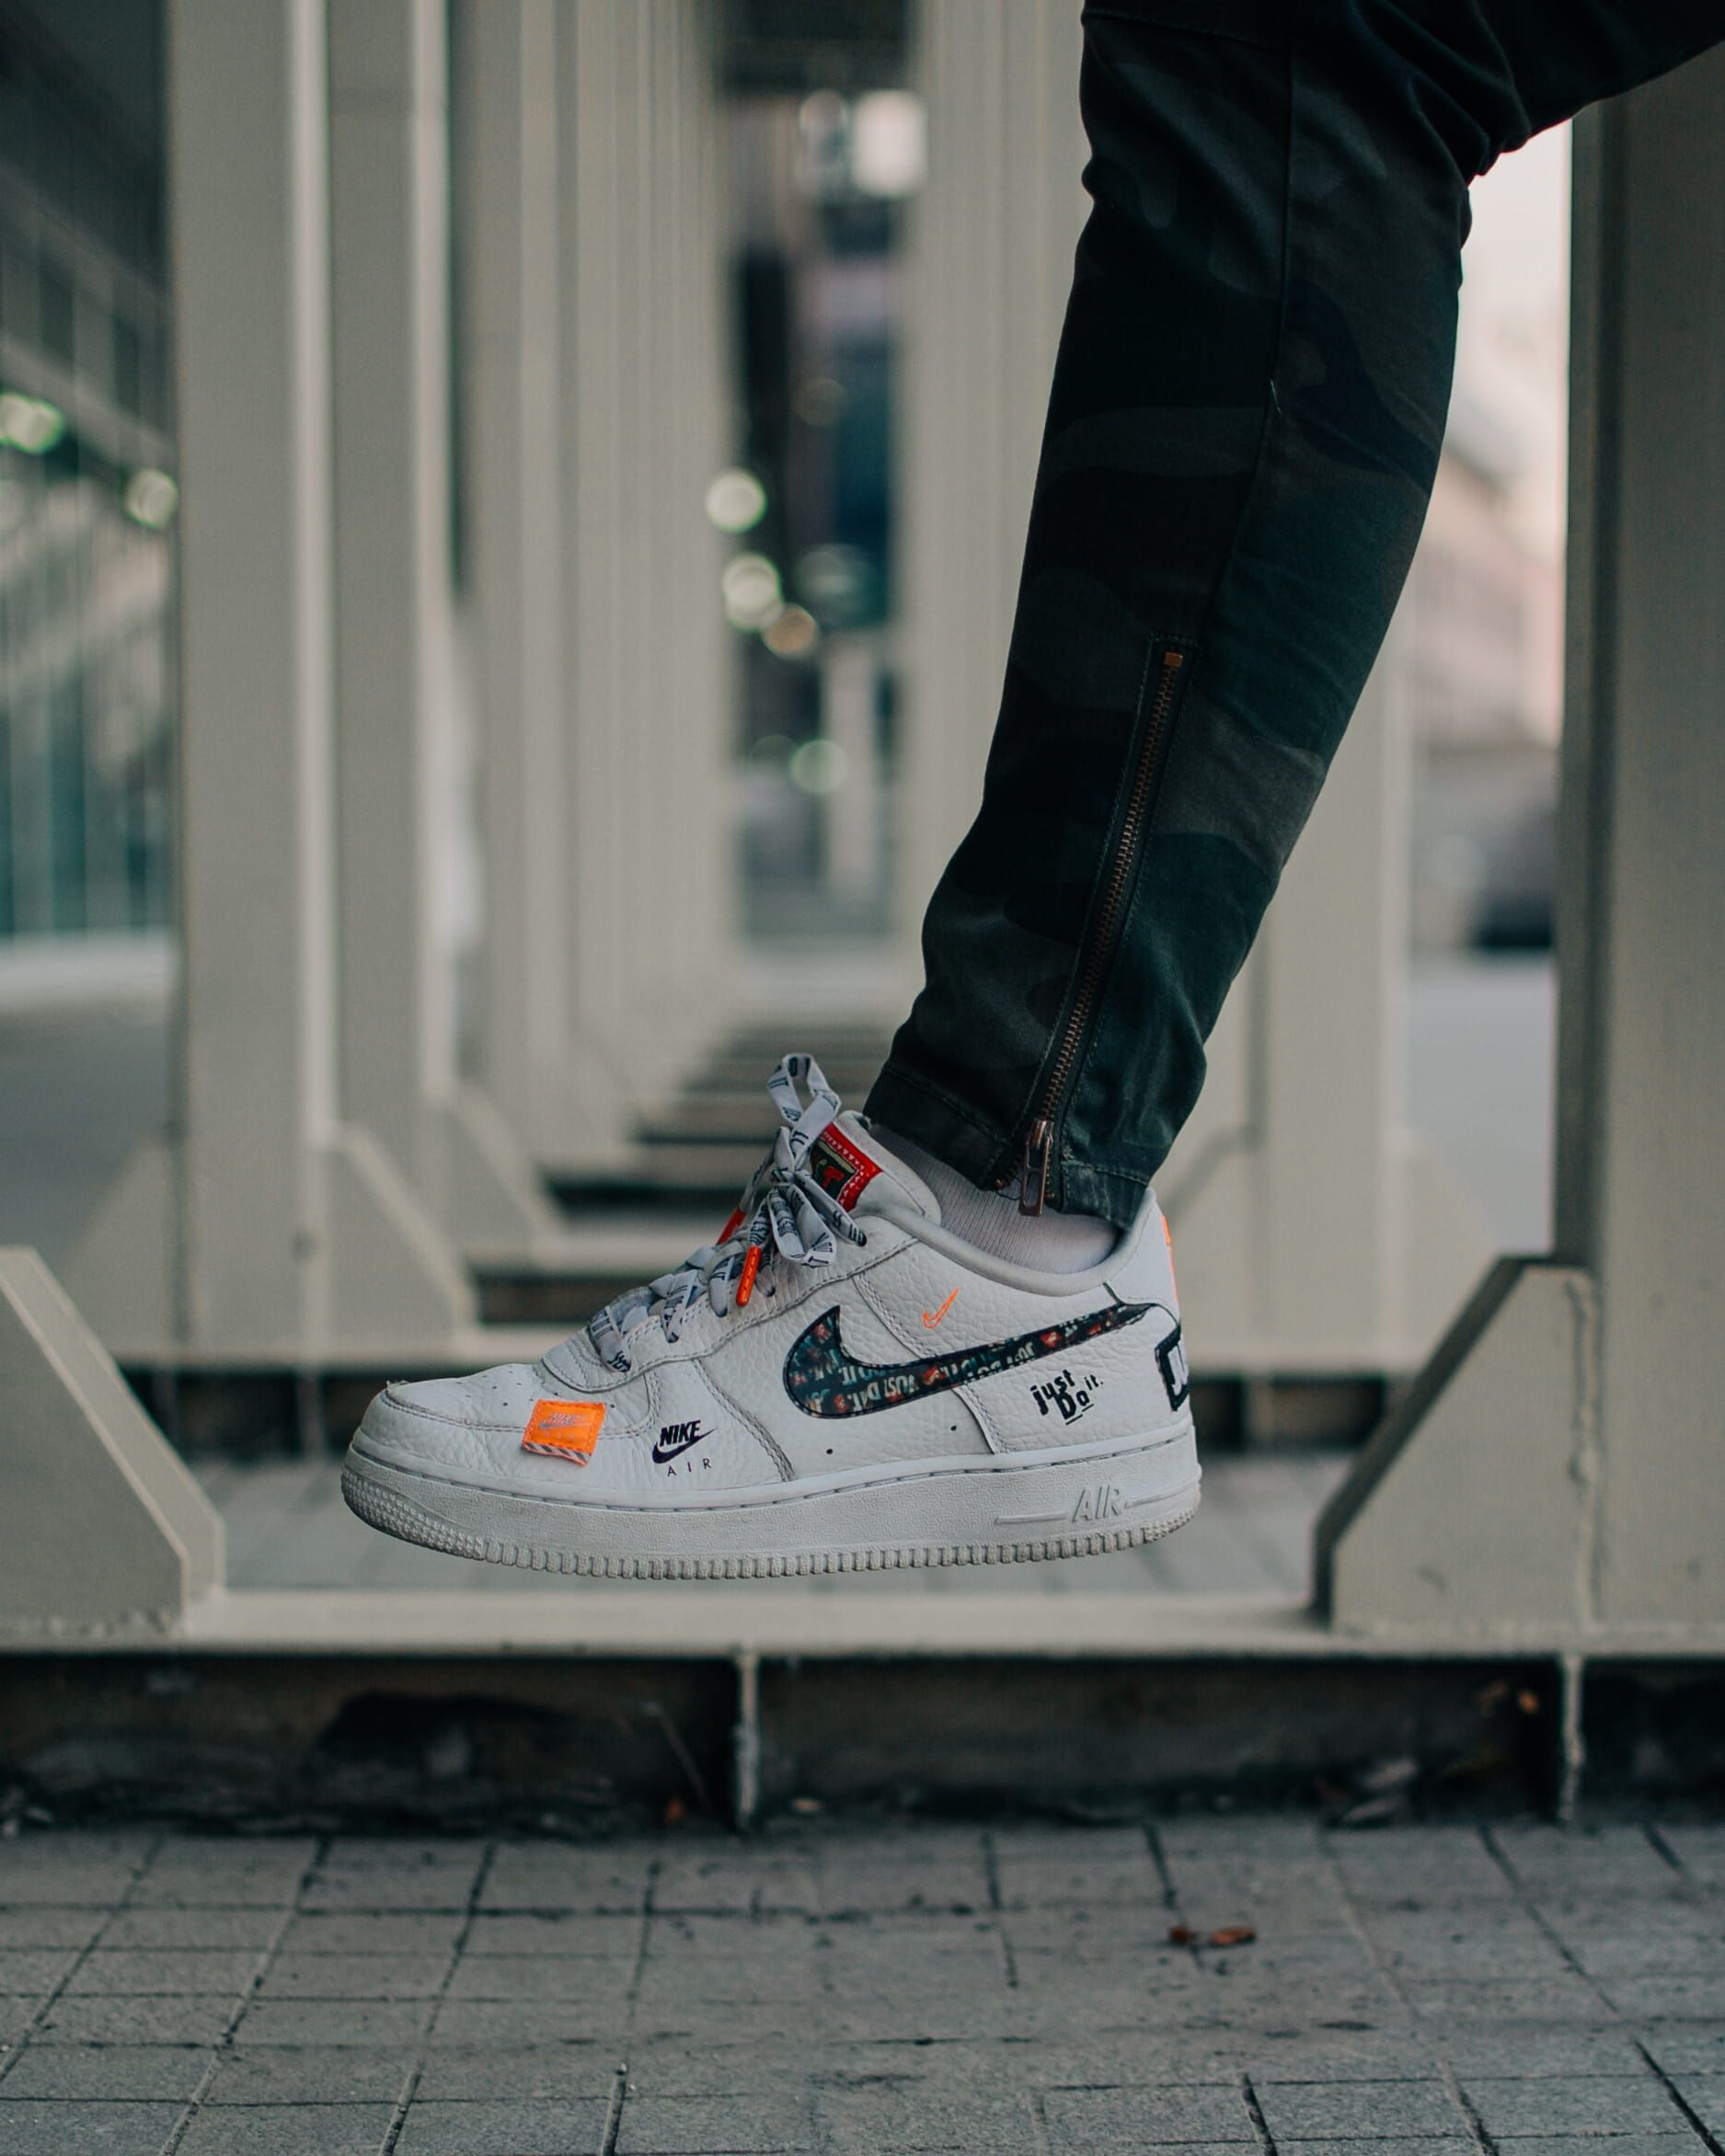 Wallpaper Selective Focus Photography Of Person Wearing Nike Air Force 1 Low Top Shoe • Wallpaper For You HD Wallpaper For Desktop & Mobile